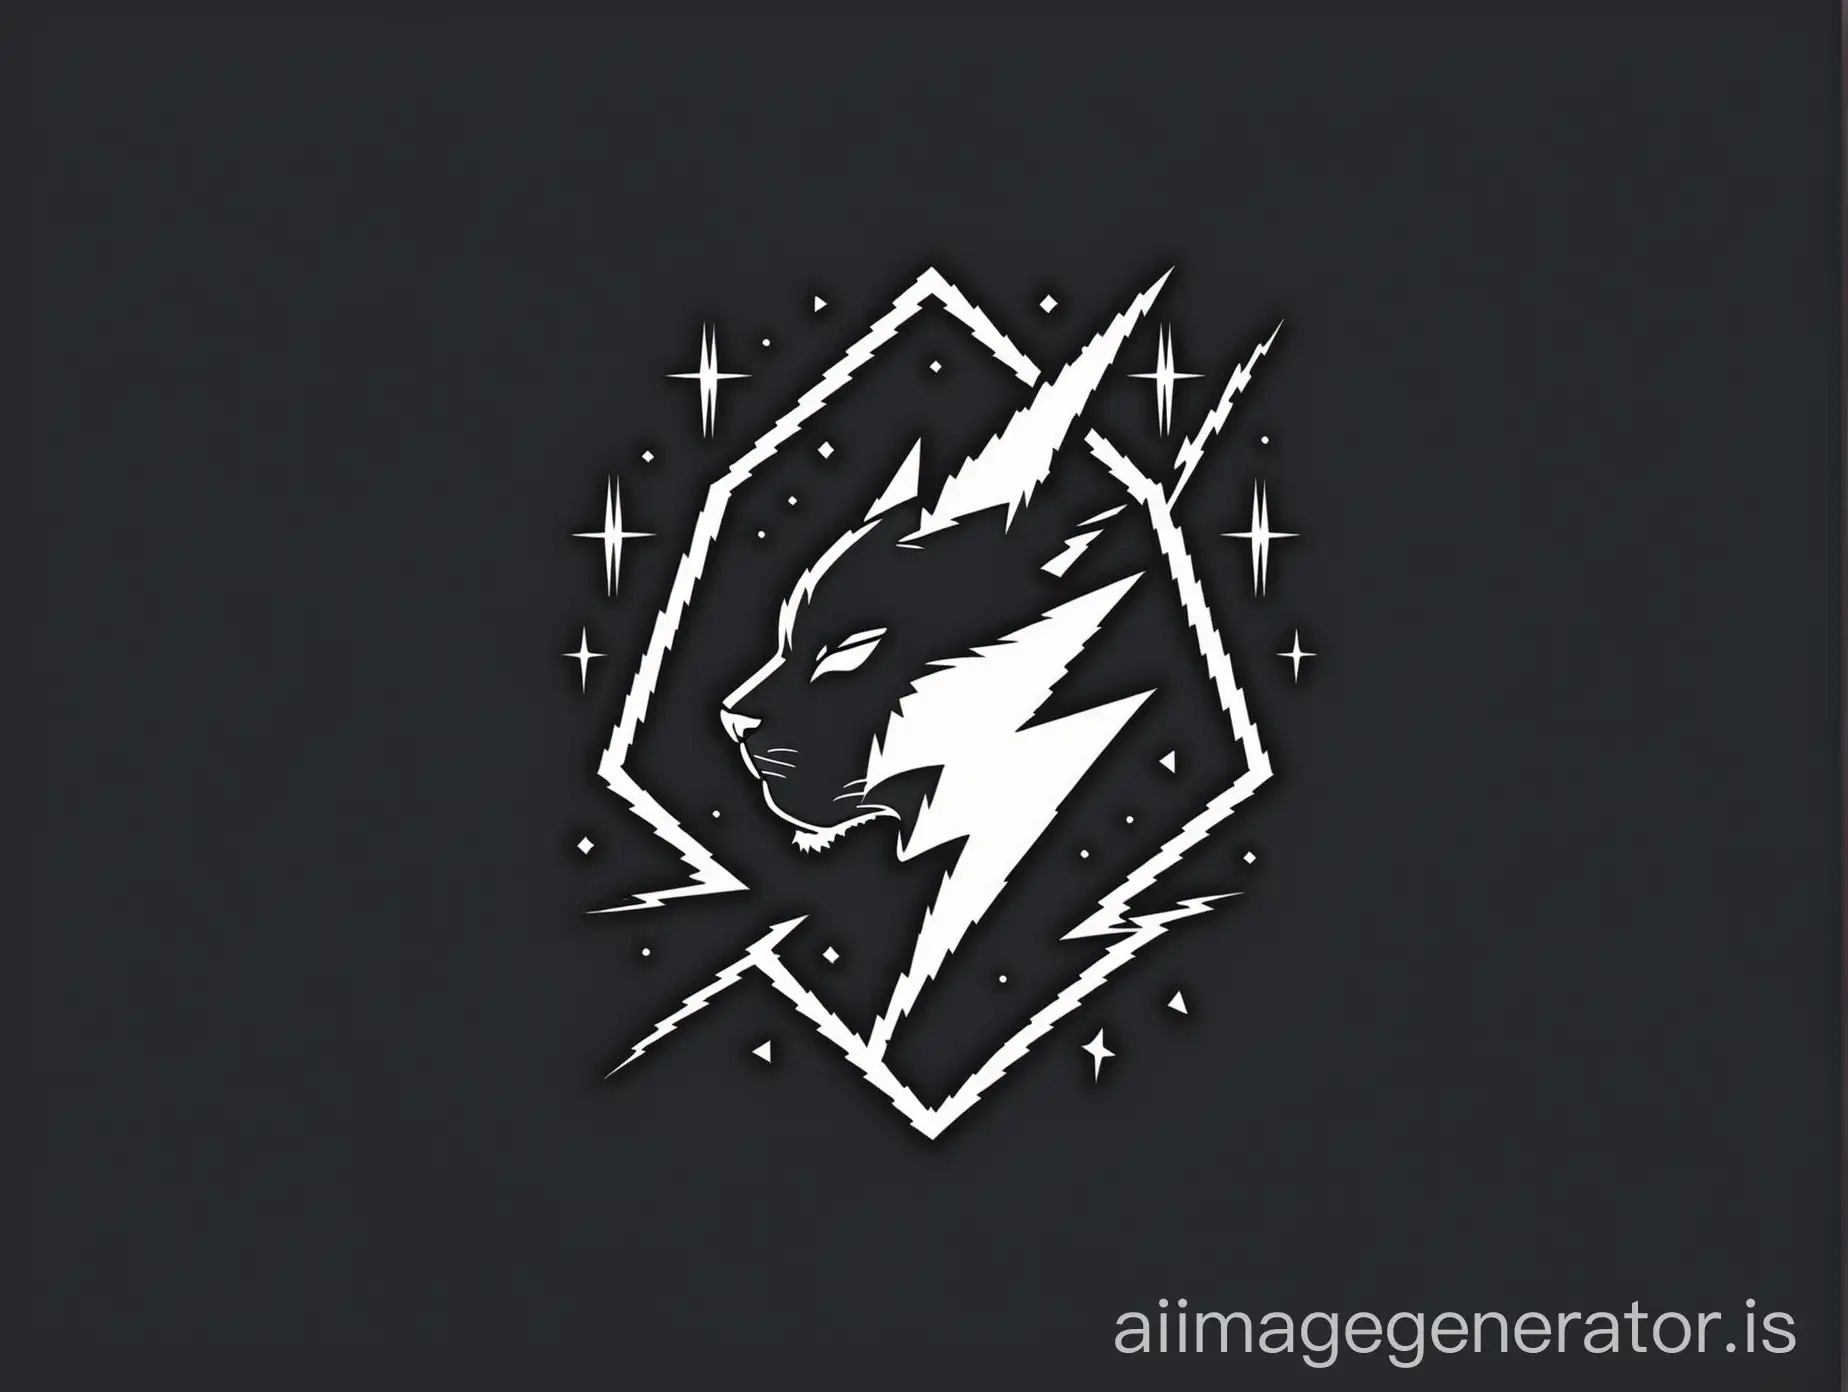 Minimalist Lynx and lightning bolt logo with simple polygonal lines, black and white.